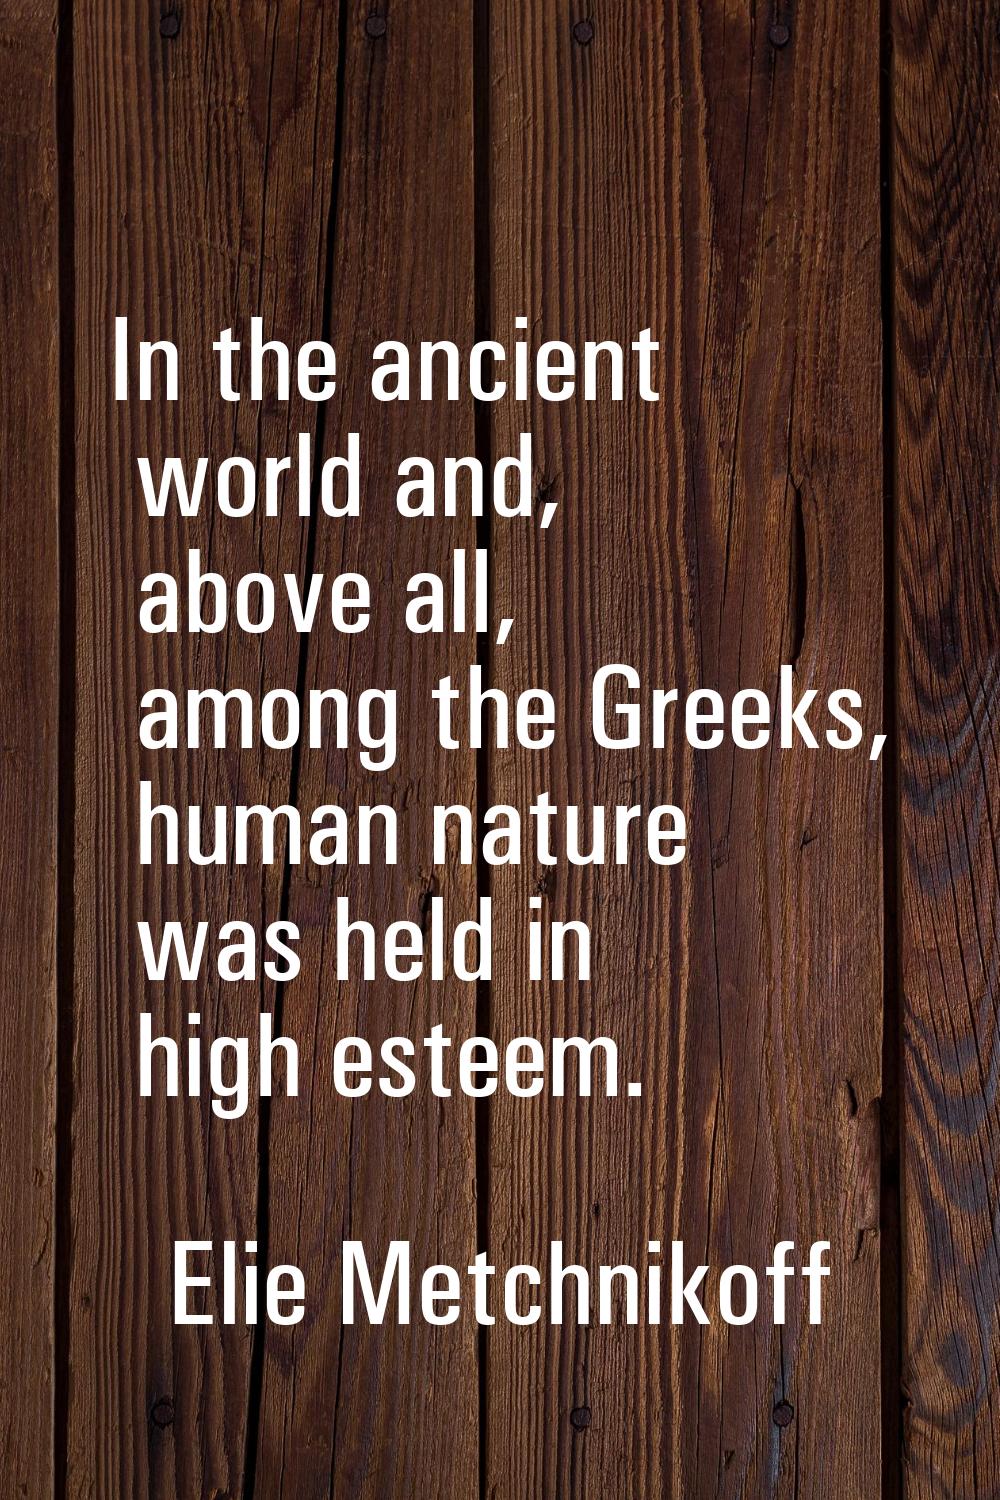 In the ancient world and, above all, among the Greeks, human nature was held in high esteem.